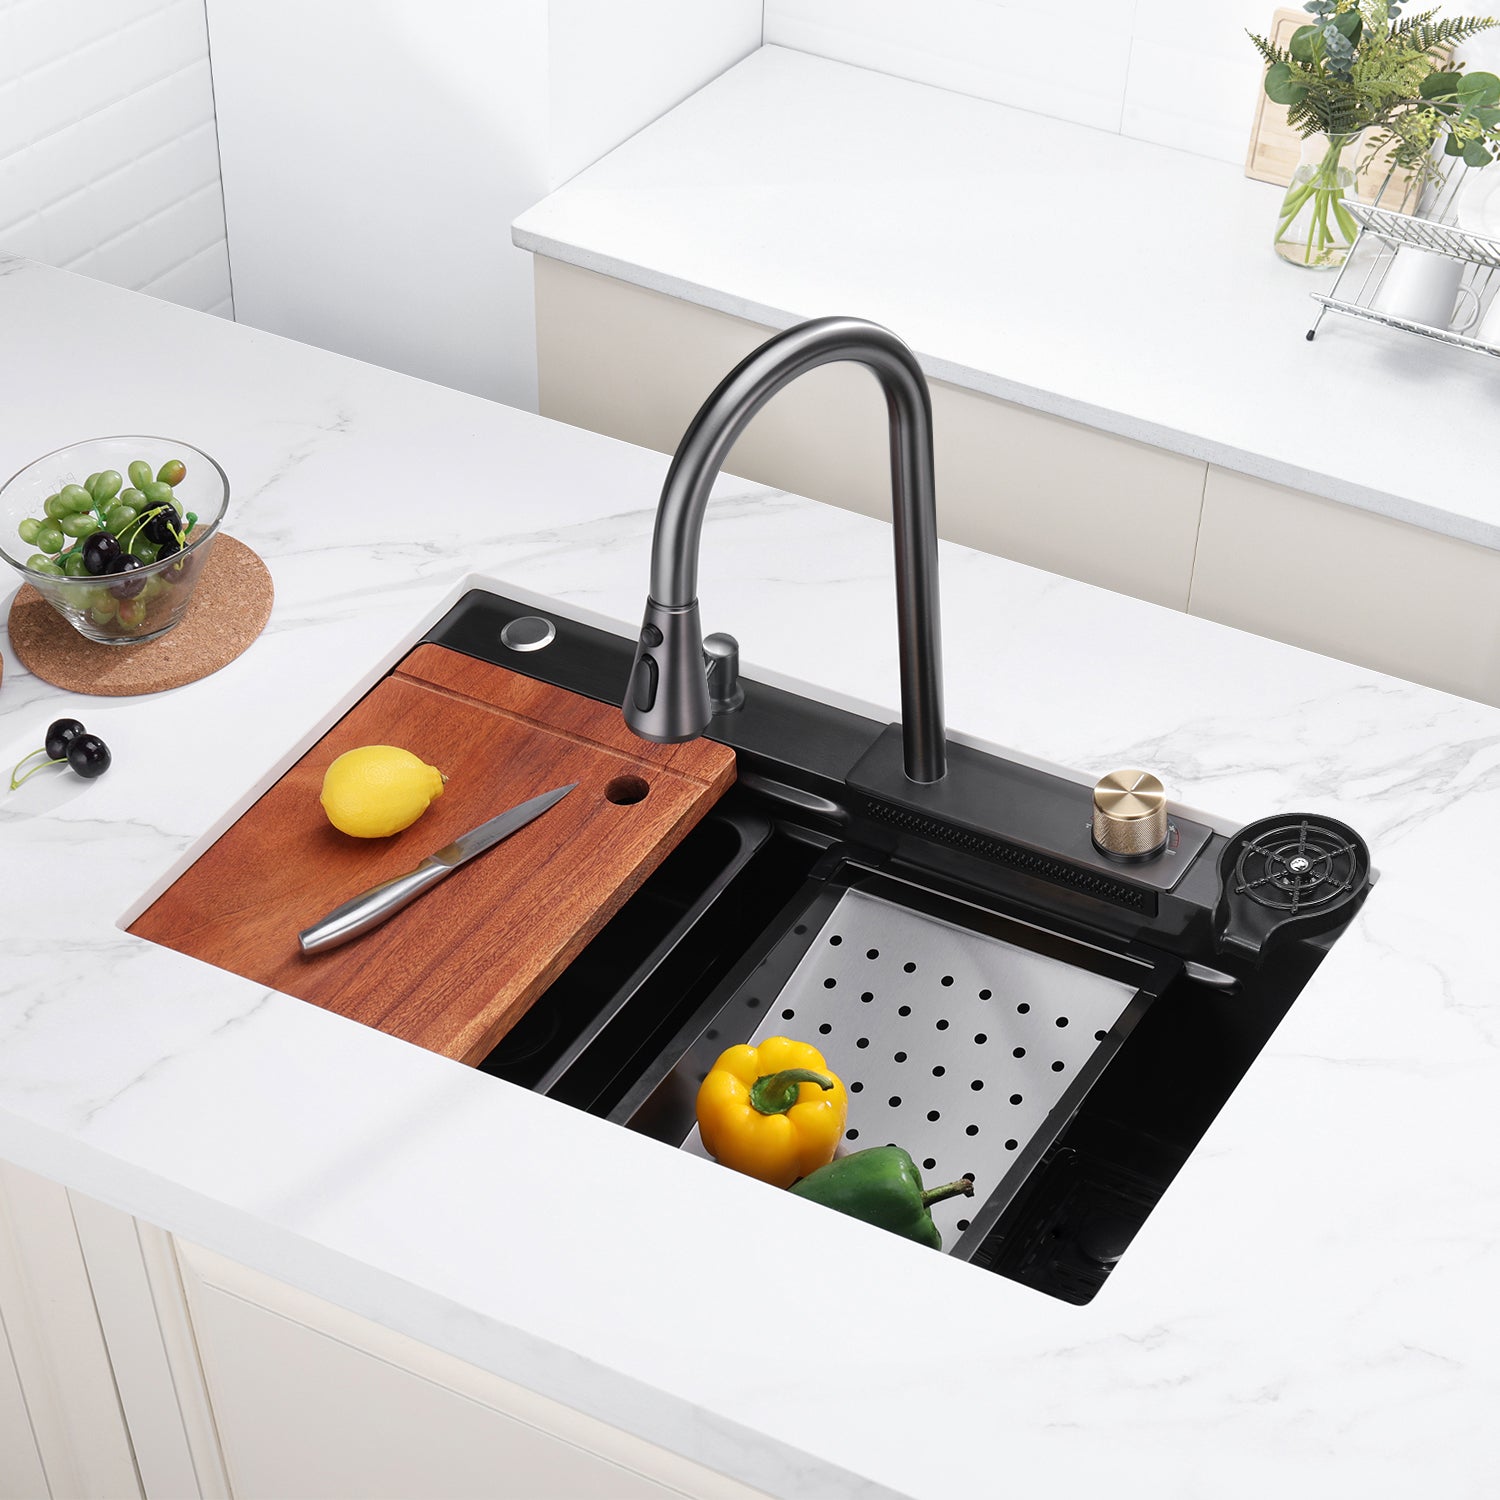 HUKA | Workstation Kitchen Sink Kit with Waterfall Faucet - SKS2301